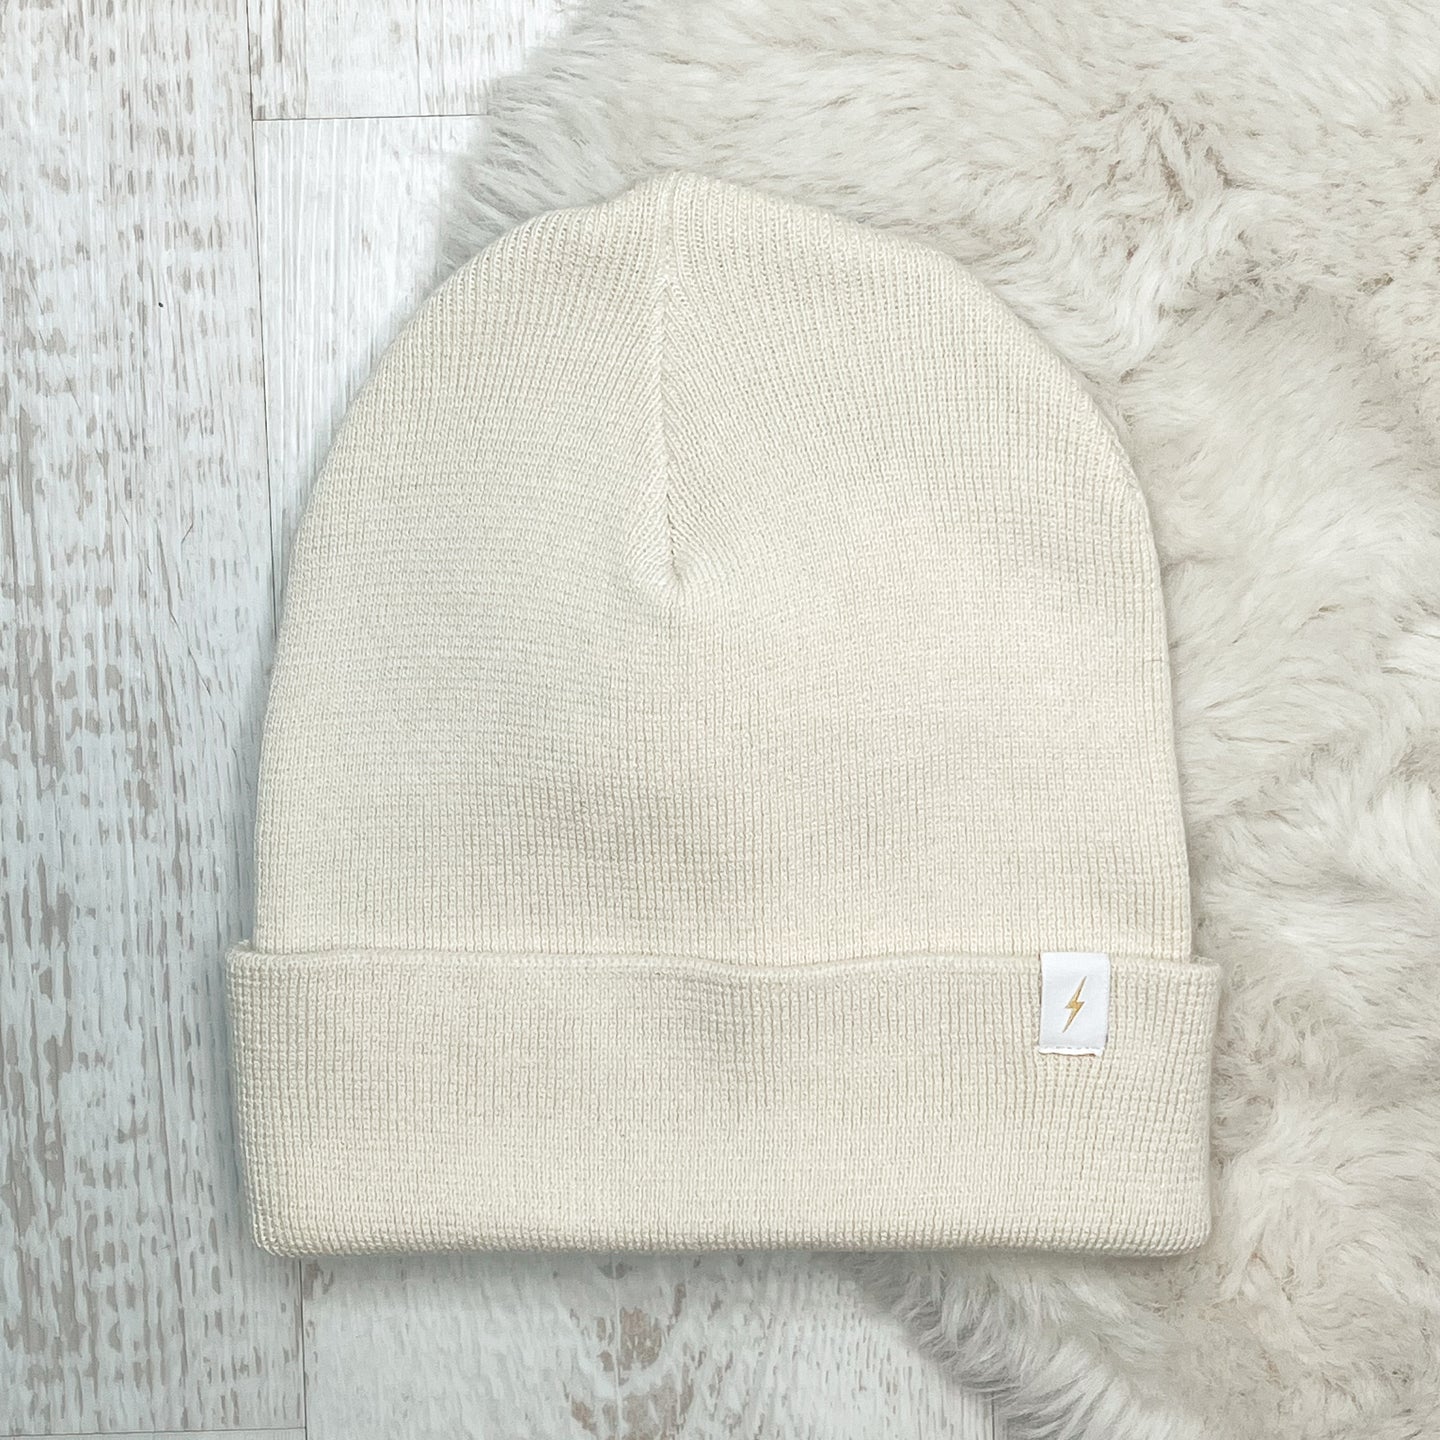 Unisex Kids & Adults Beanie Hat - Soft White With Bolt